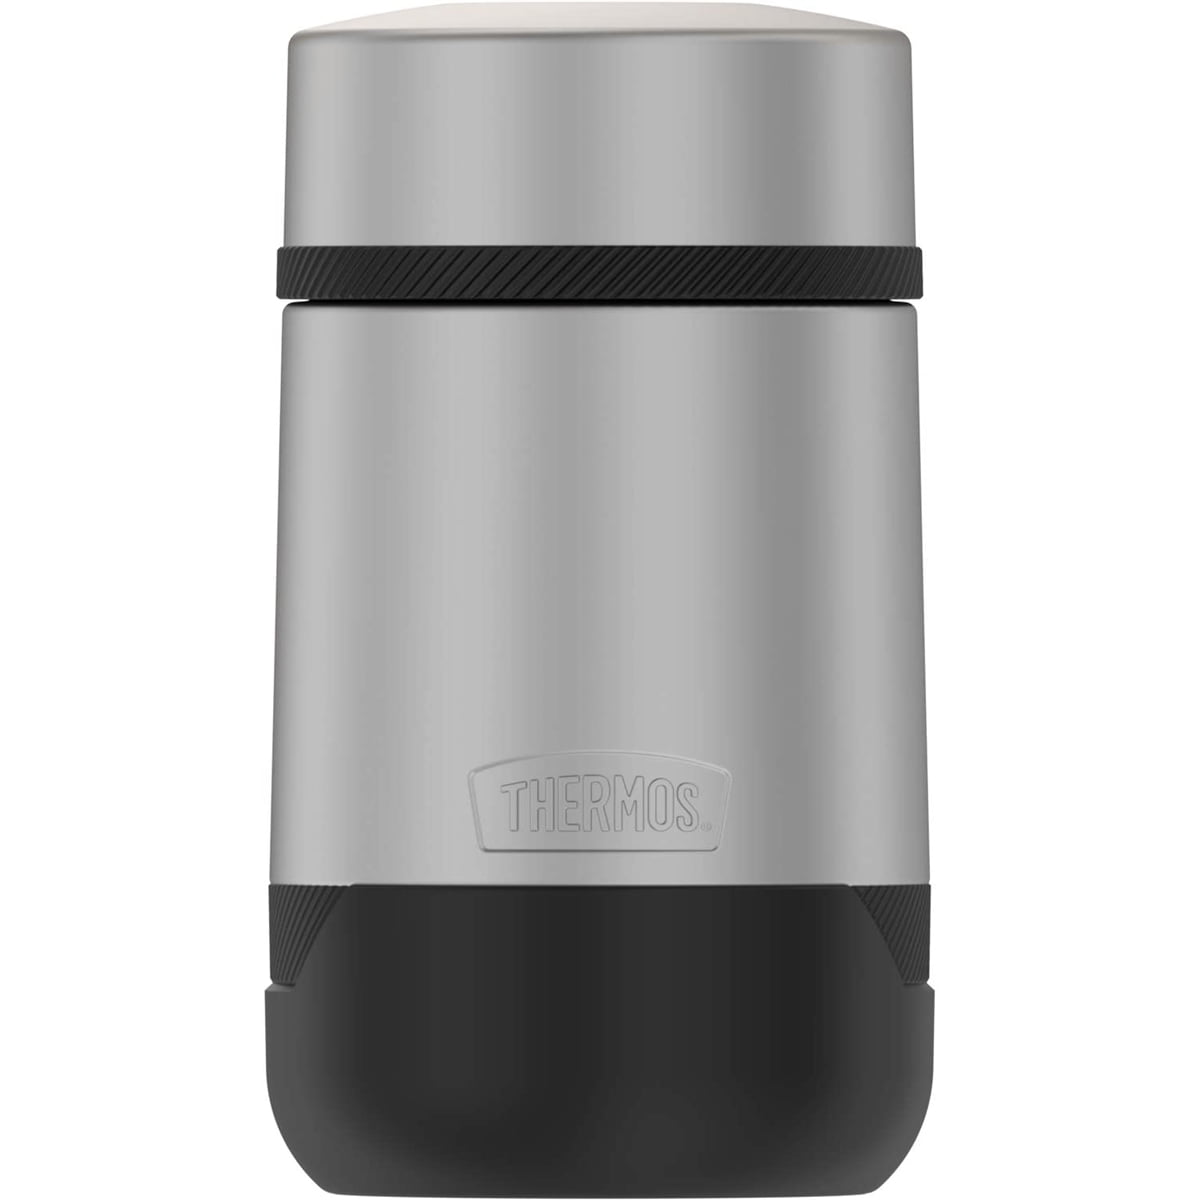 Thermos 24 oz. Granite Black Stainless Steel Food Jar with Spoon  EA-IS3012GT4 - The Home Depot